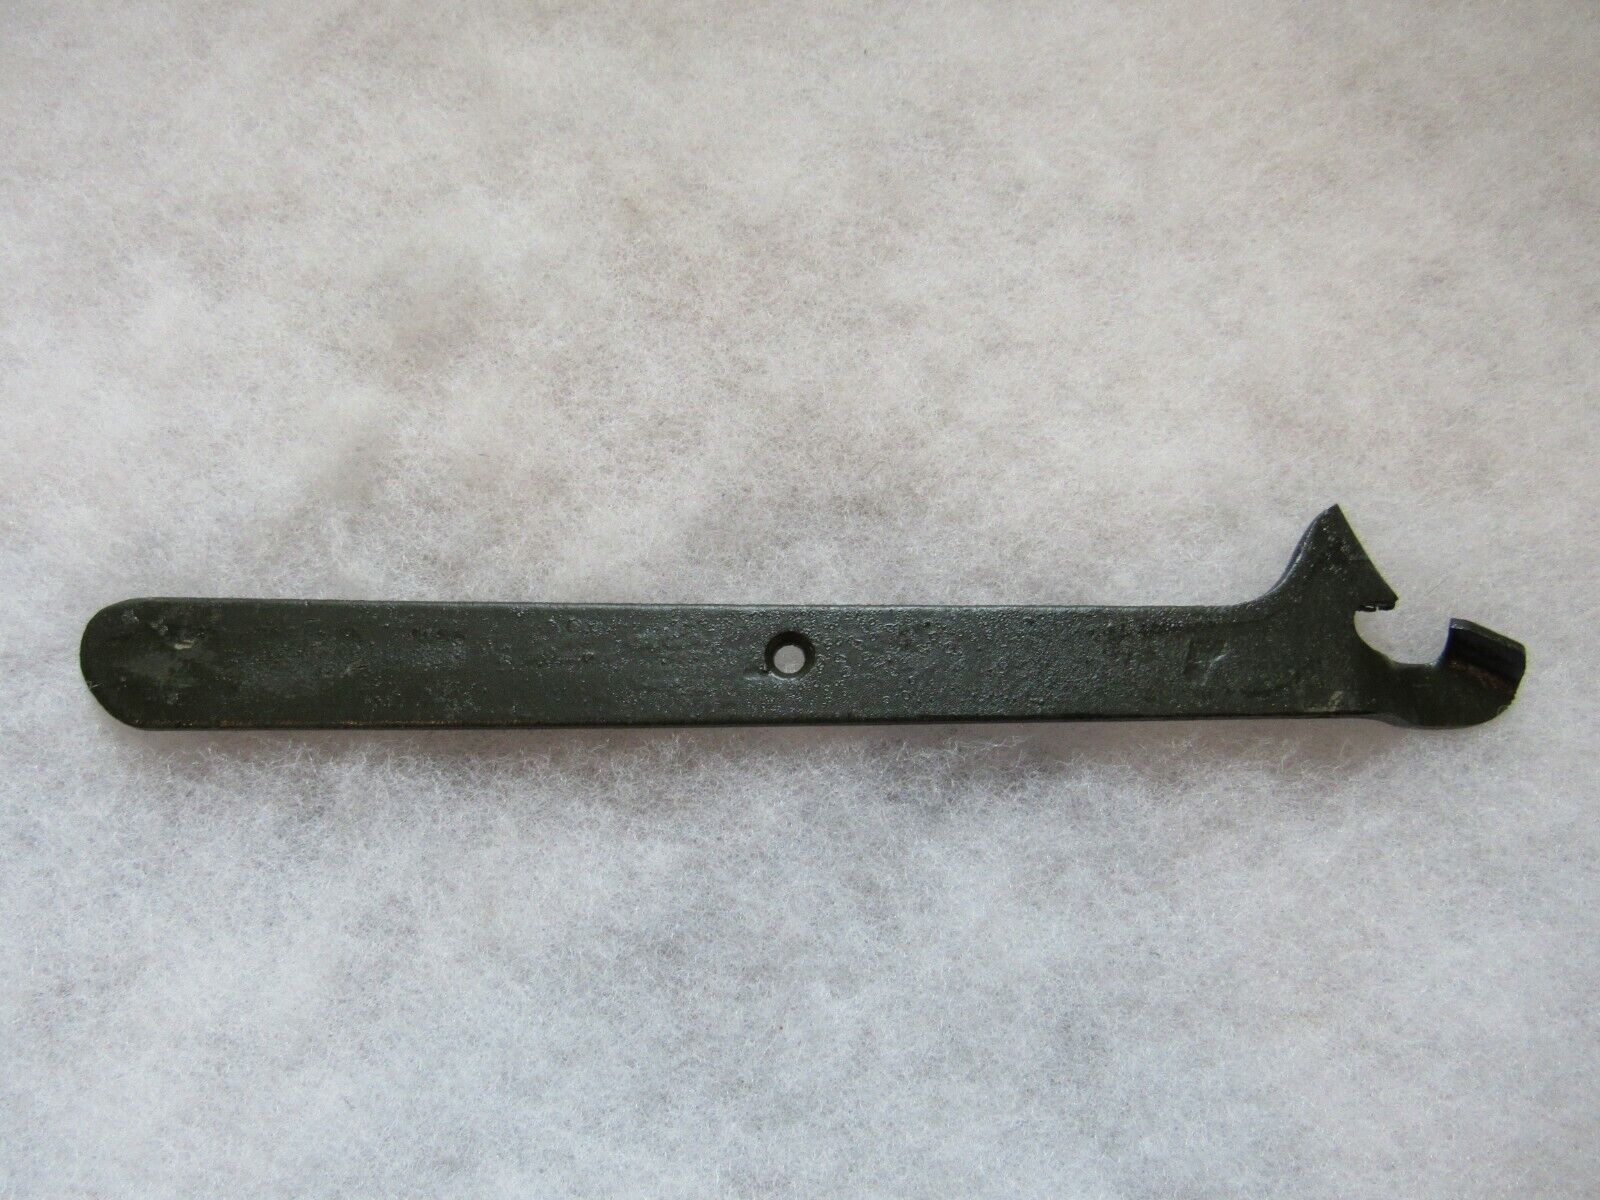 Post WWII Russian spam can ammo opener key